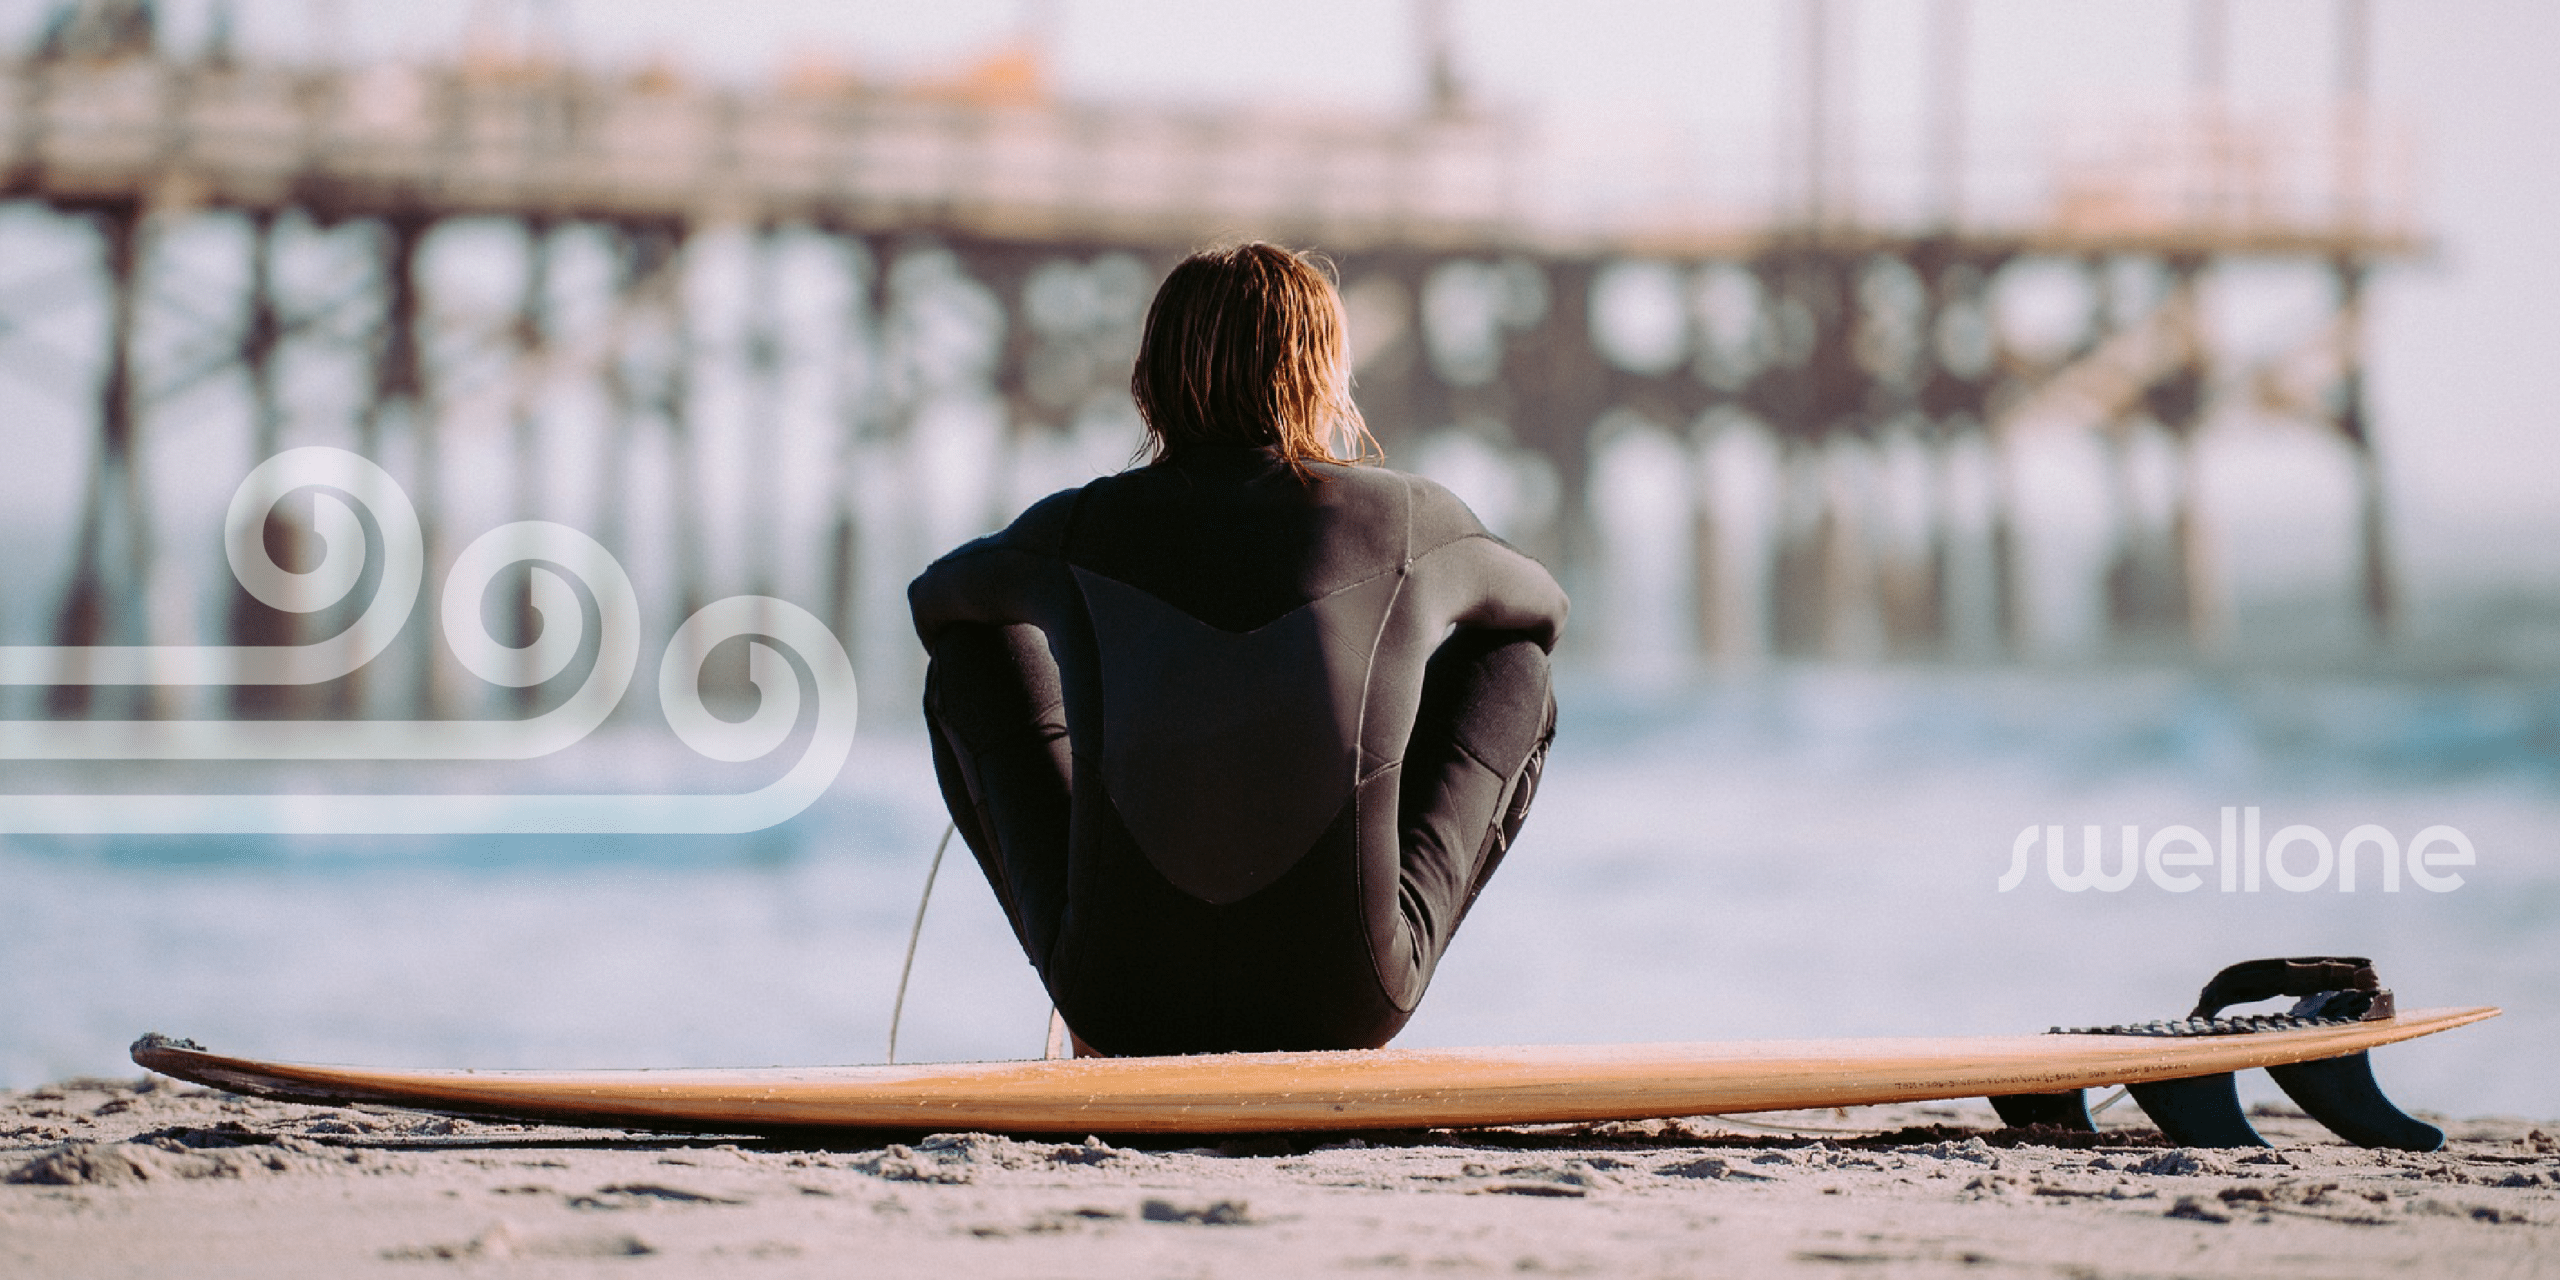 Surfer sitting in front of their surfboard watching the ocean.